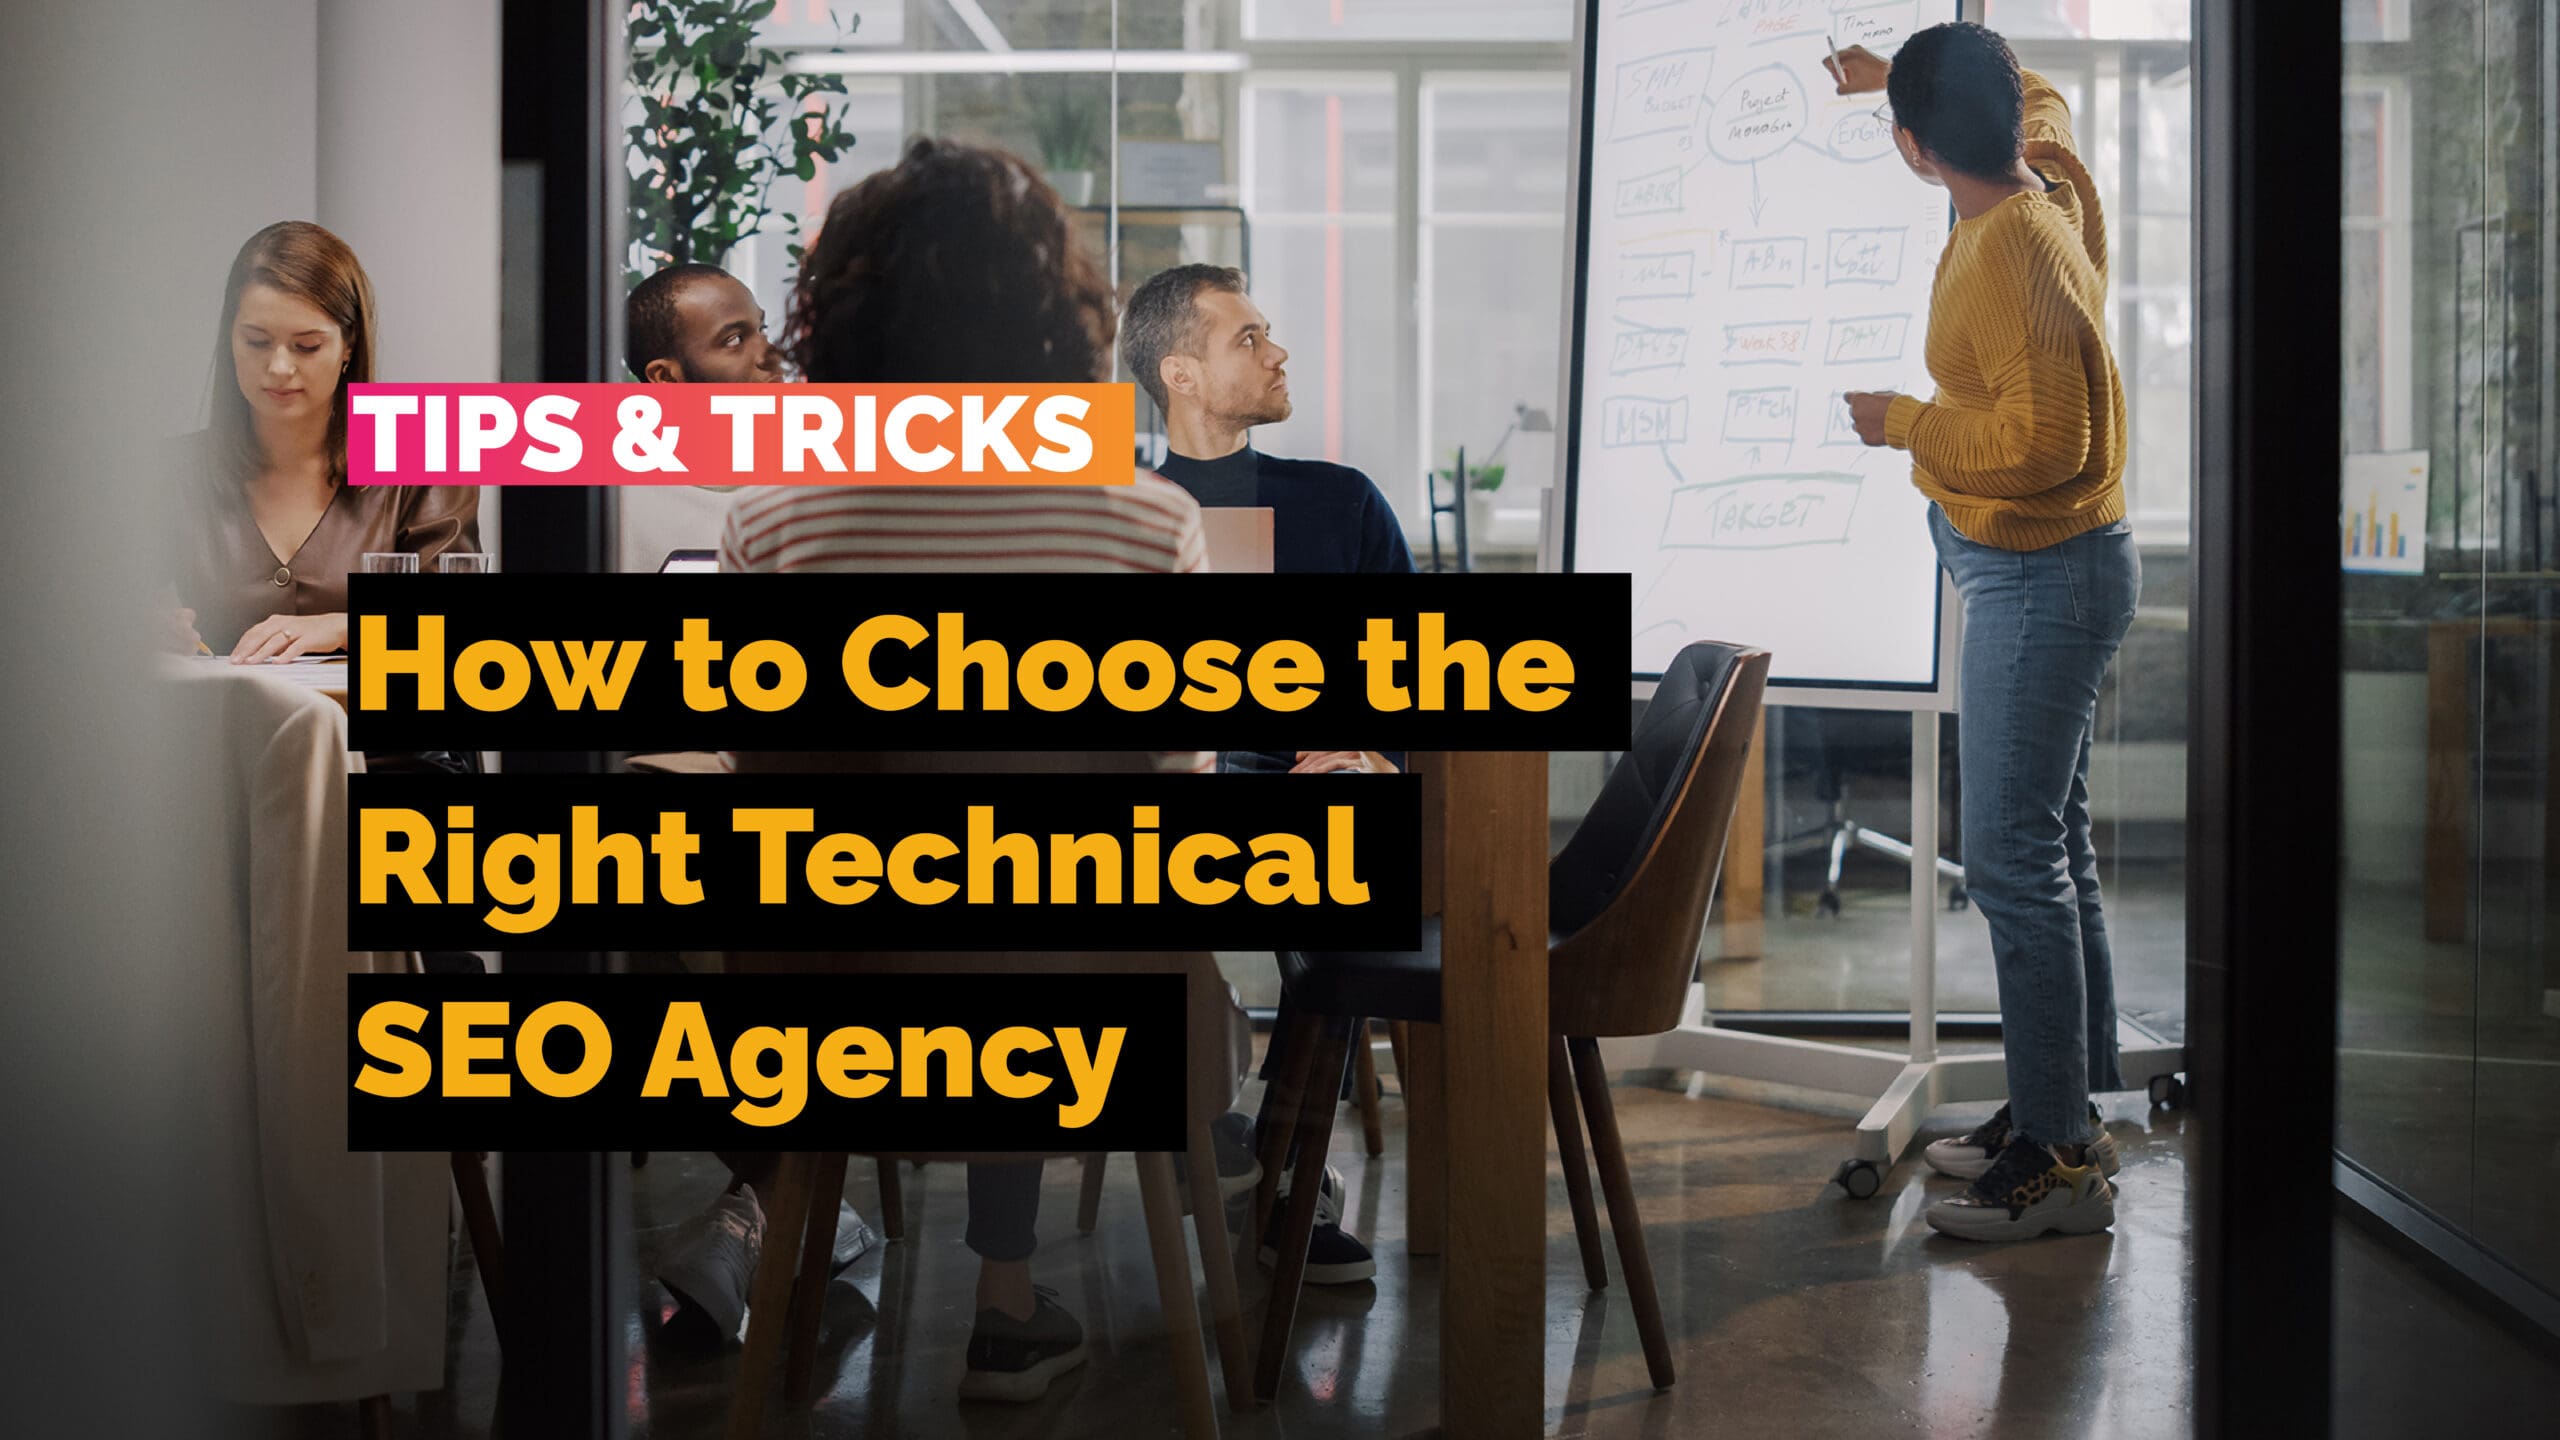 How to Choose the Right Technical SEO Agency: Tips & Tricks - VOiD Applications